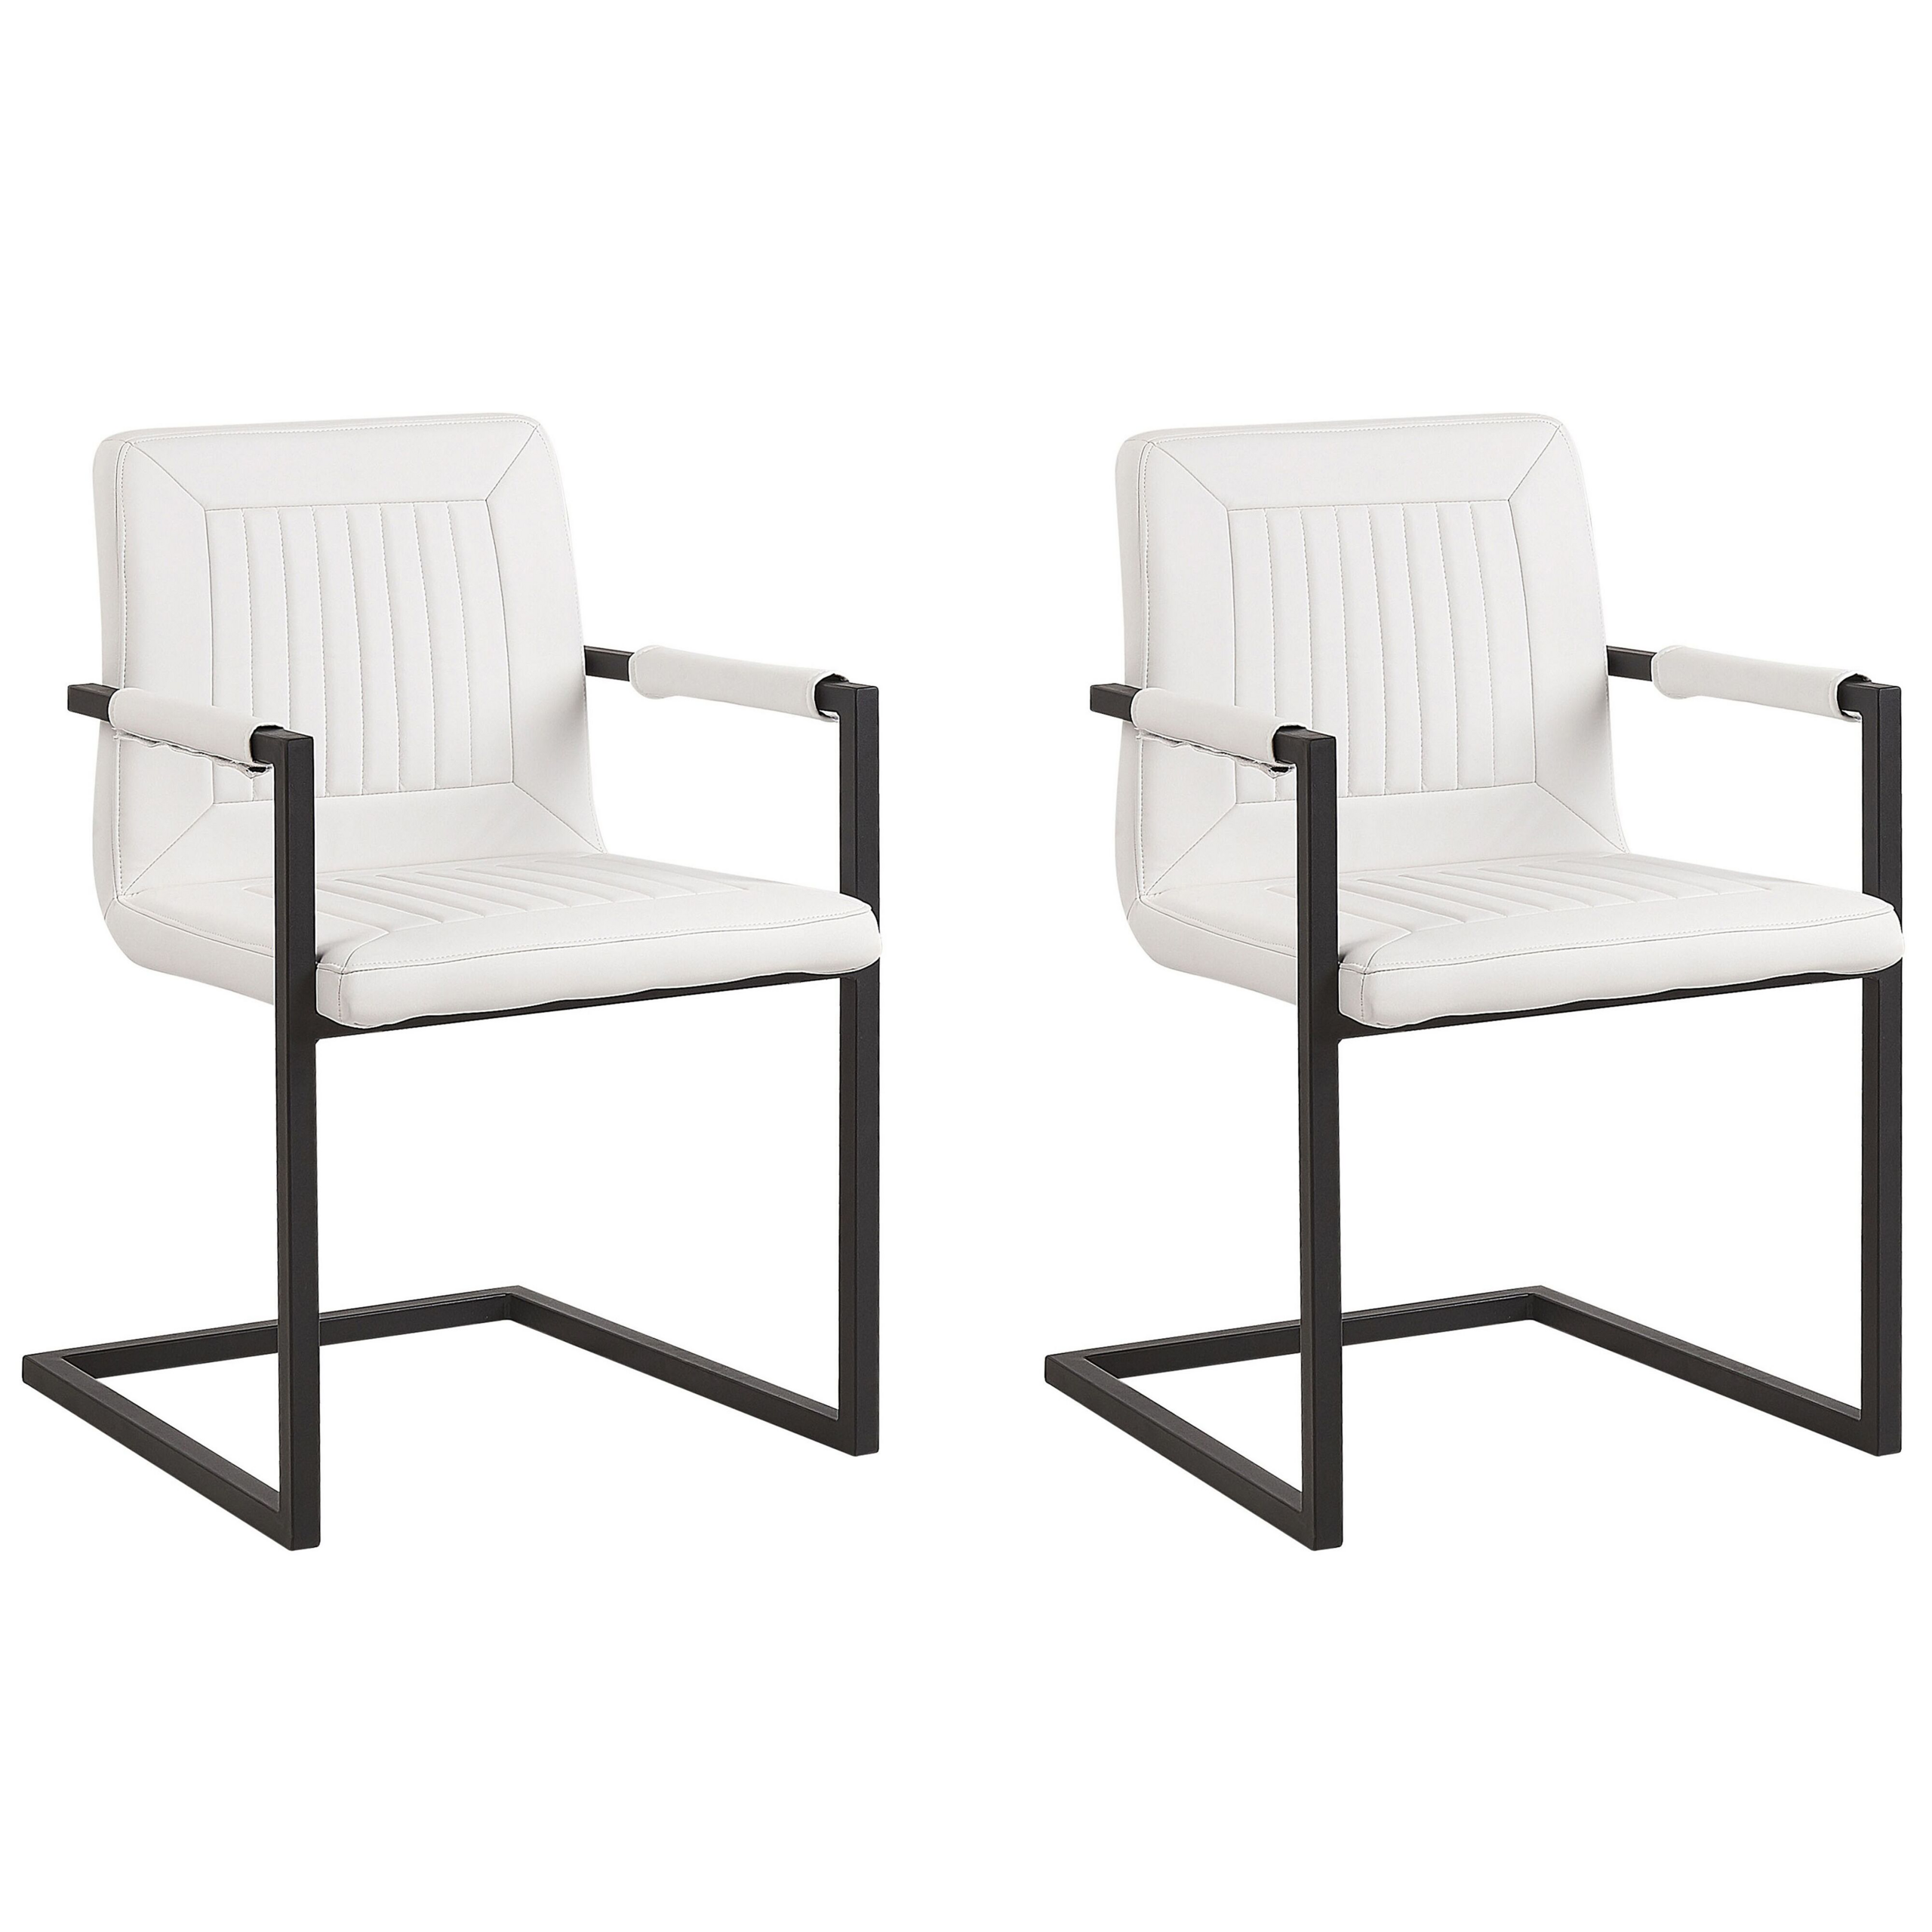 Beliani Set of 2 Cantilever Dining Chairs Off-White Faux Leather Upholstered Chair Office Conference Room